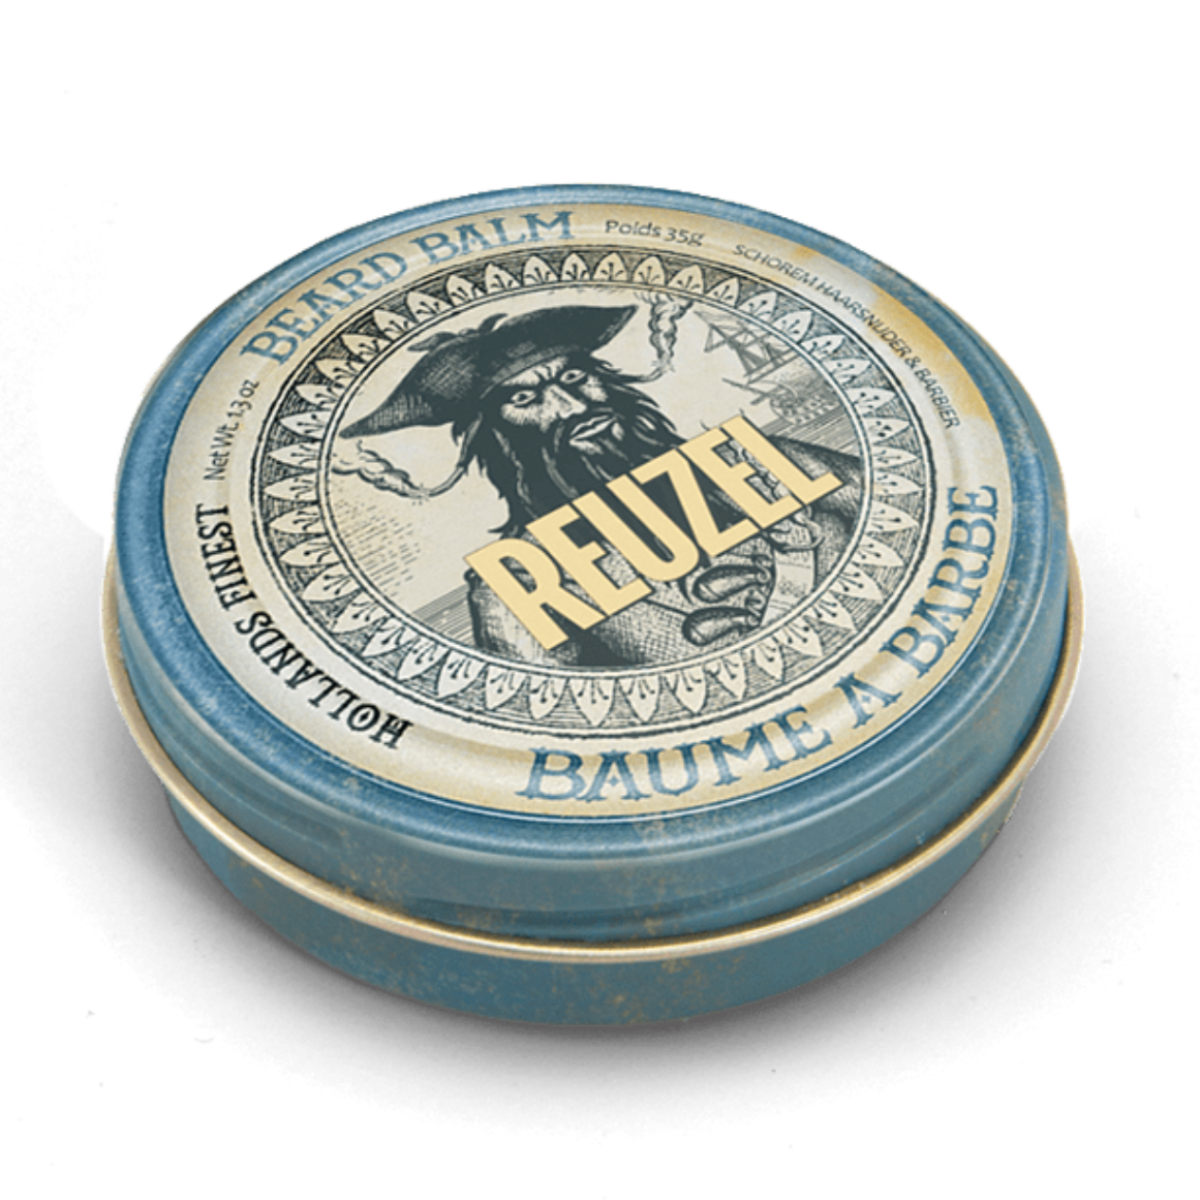 Reuzel Beard Balm softens your beard and protects the skin. Created with shea butter and argan oil Masculine, deep woods scent.